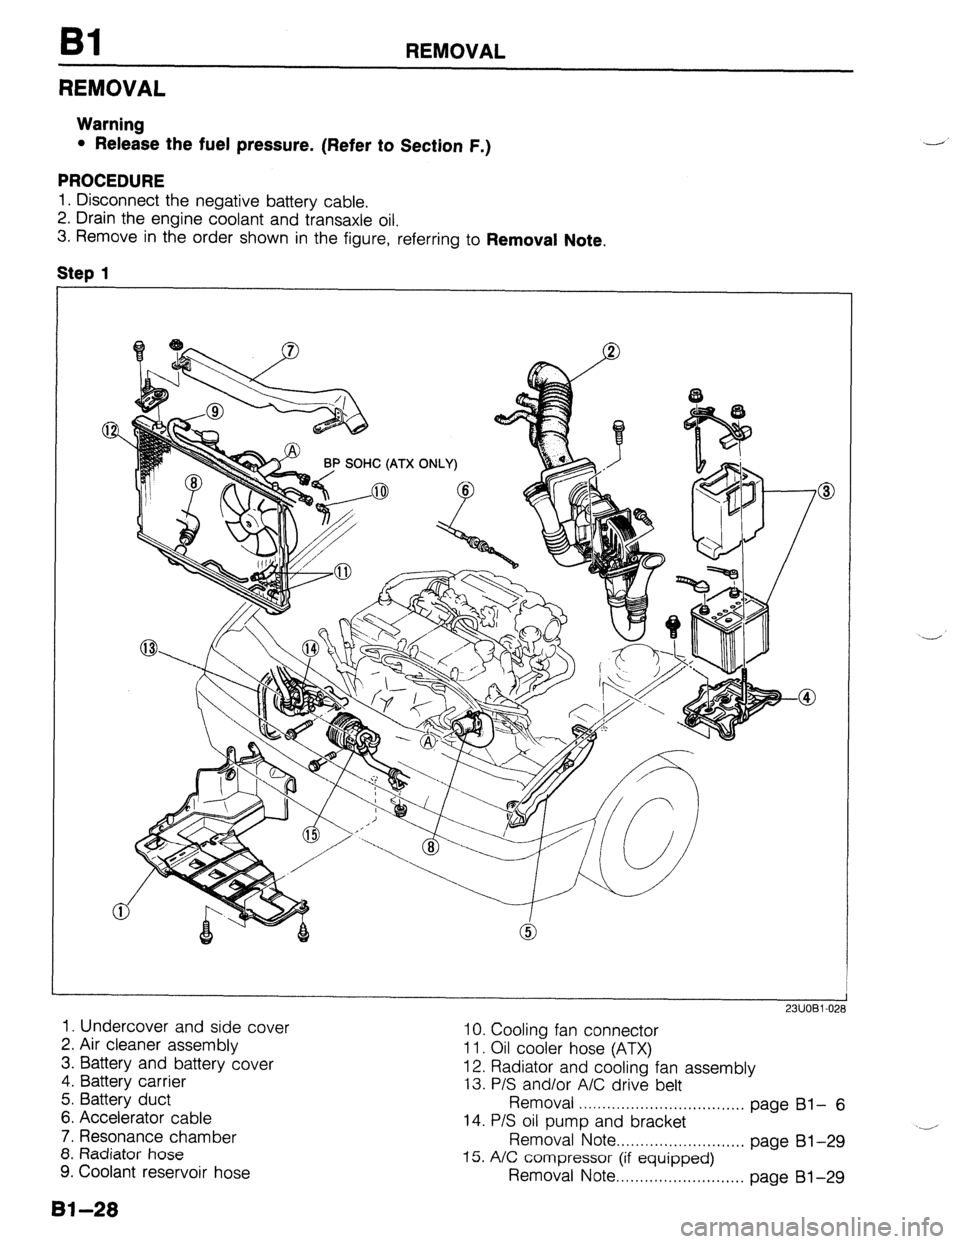 MAZDA PROTEGE 1992  Workshop Manual REMOVAL 
REMOVAL 
Warning 
l Release the fuel pressure. (Refer to Section F.) 
PROCEDURE 
1. Disconnect the negative battery cable. 
2. Drain the engine coolant and transaxle oil. 
3. Remove in the or